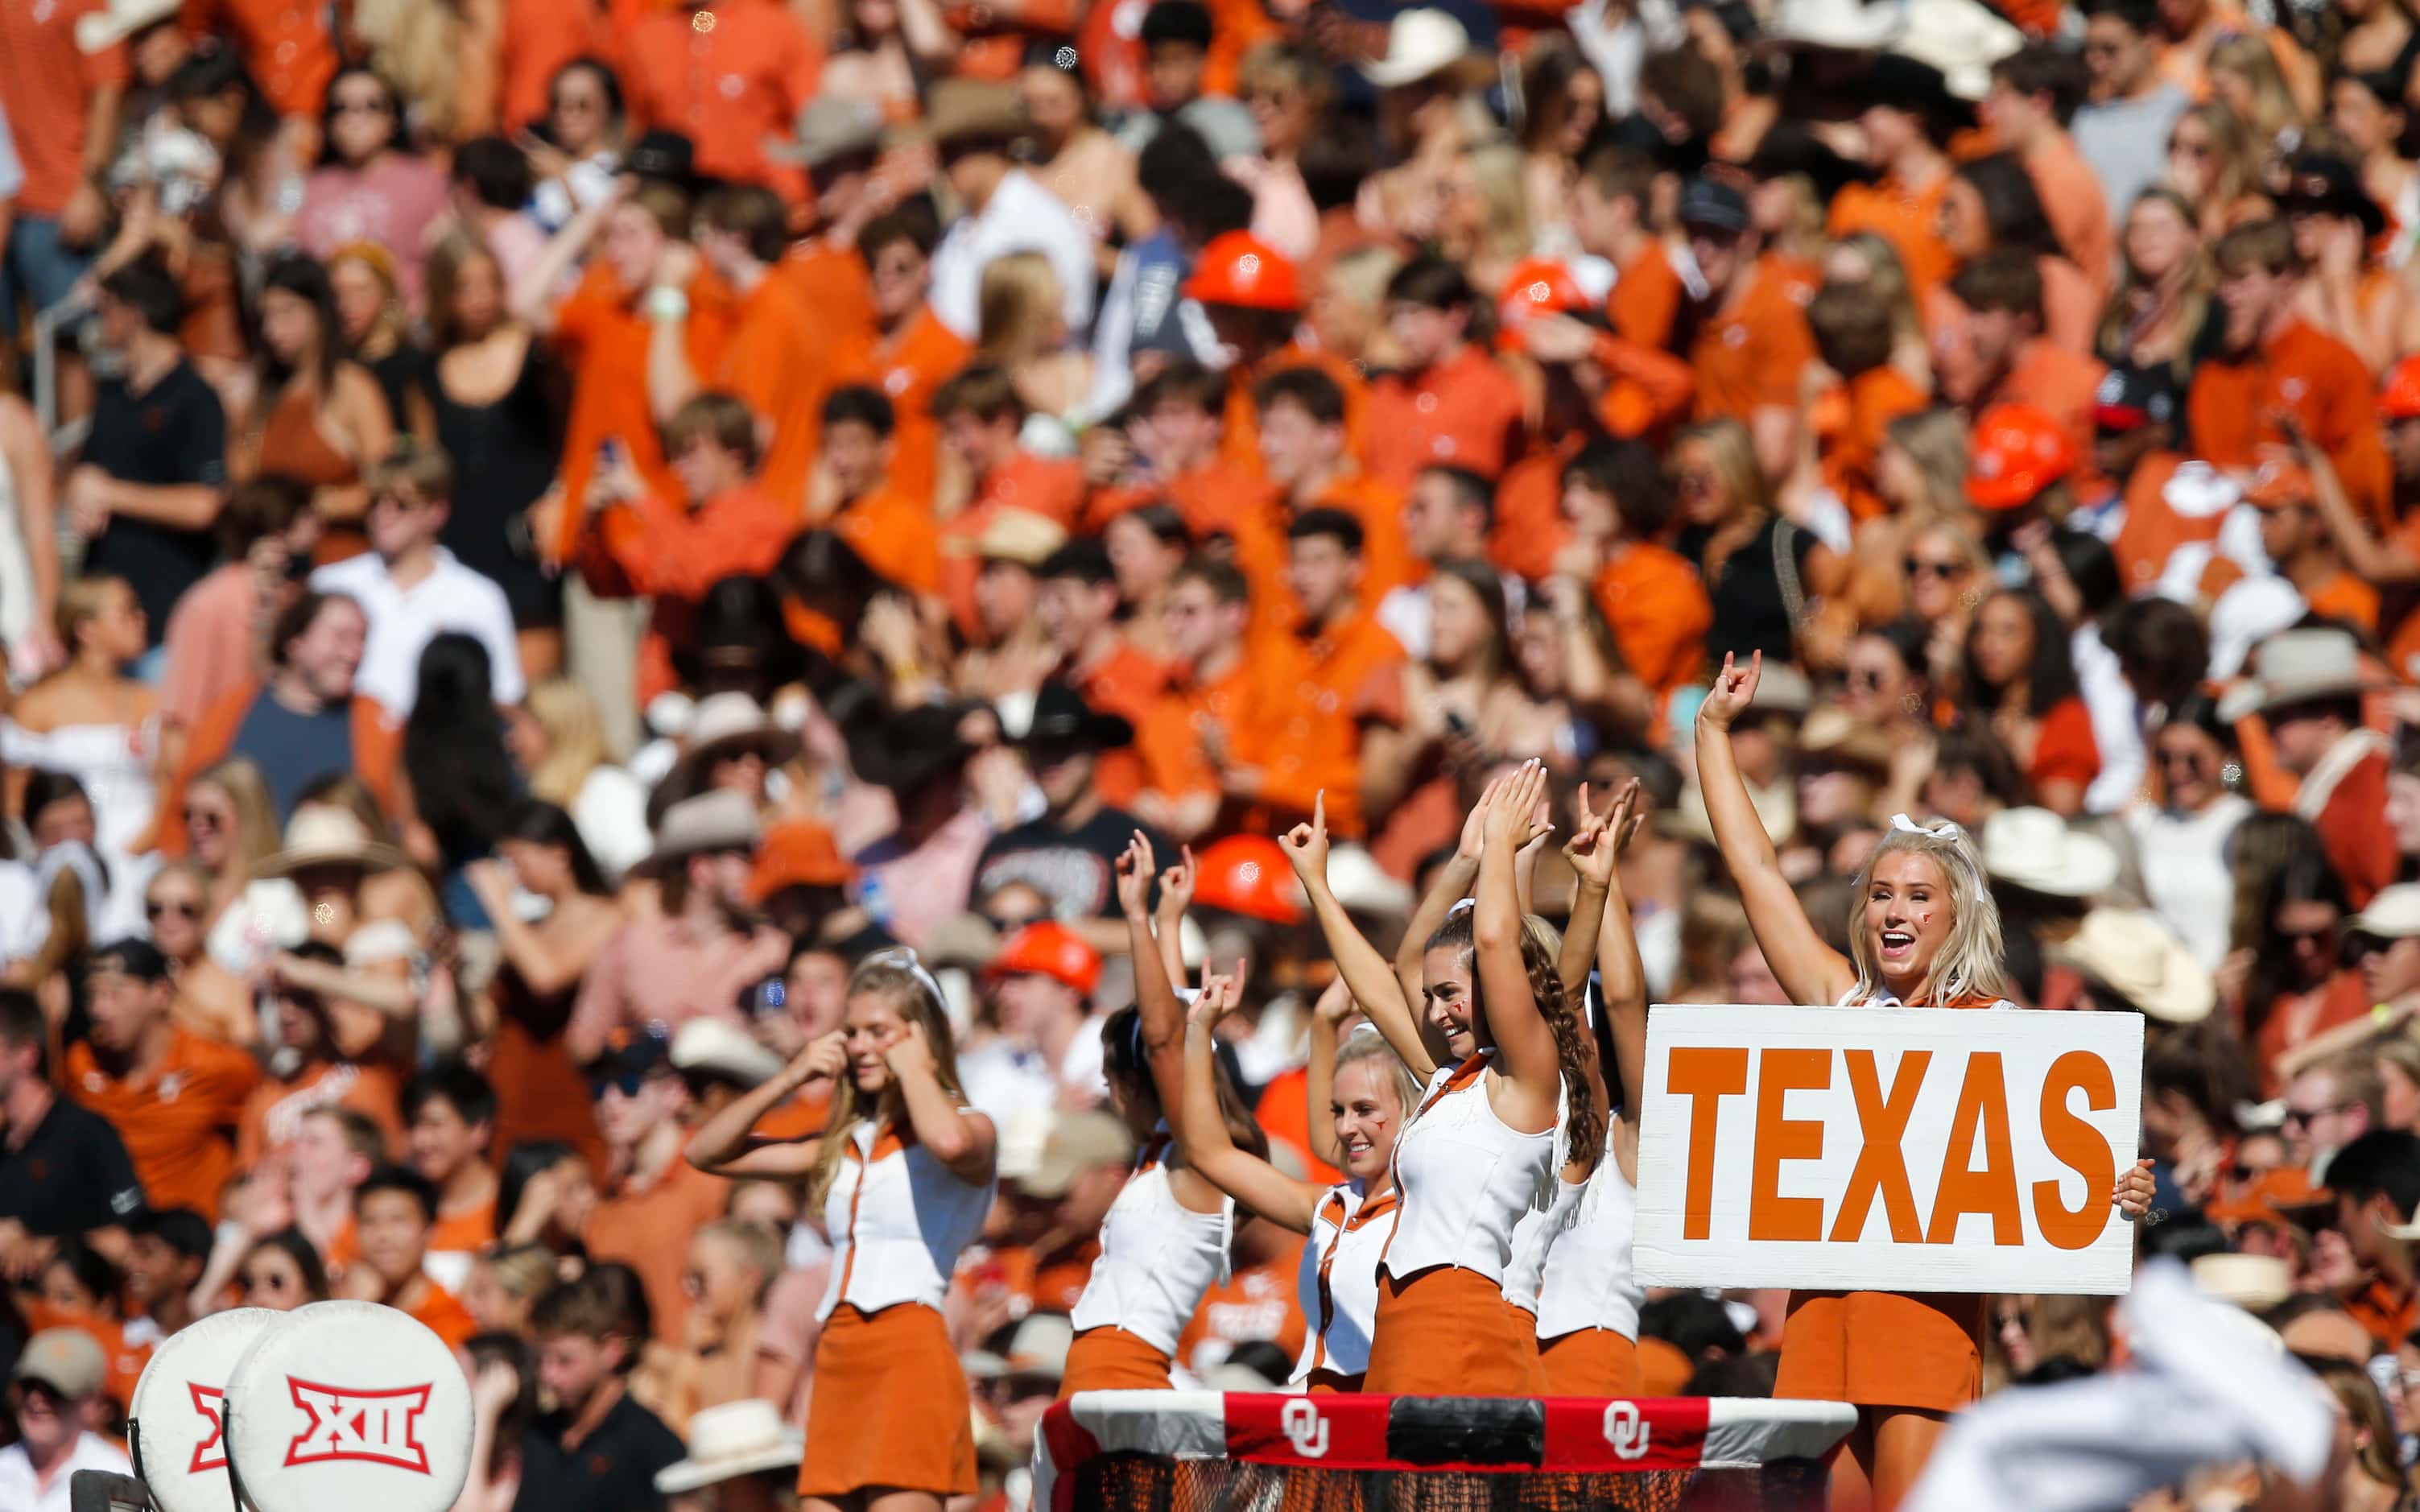 Texas cheerleaders lead fans in cheering for their team during the first half of an NCAA...